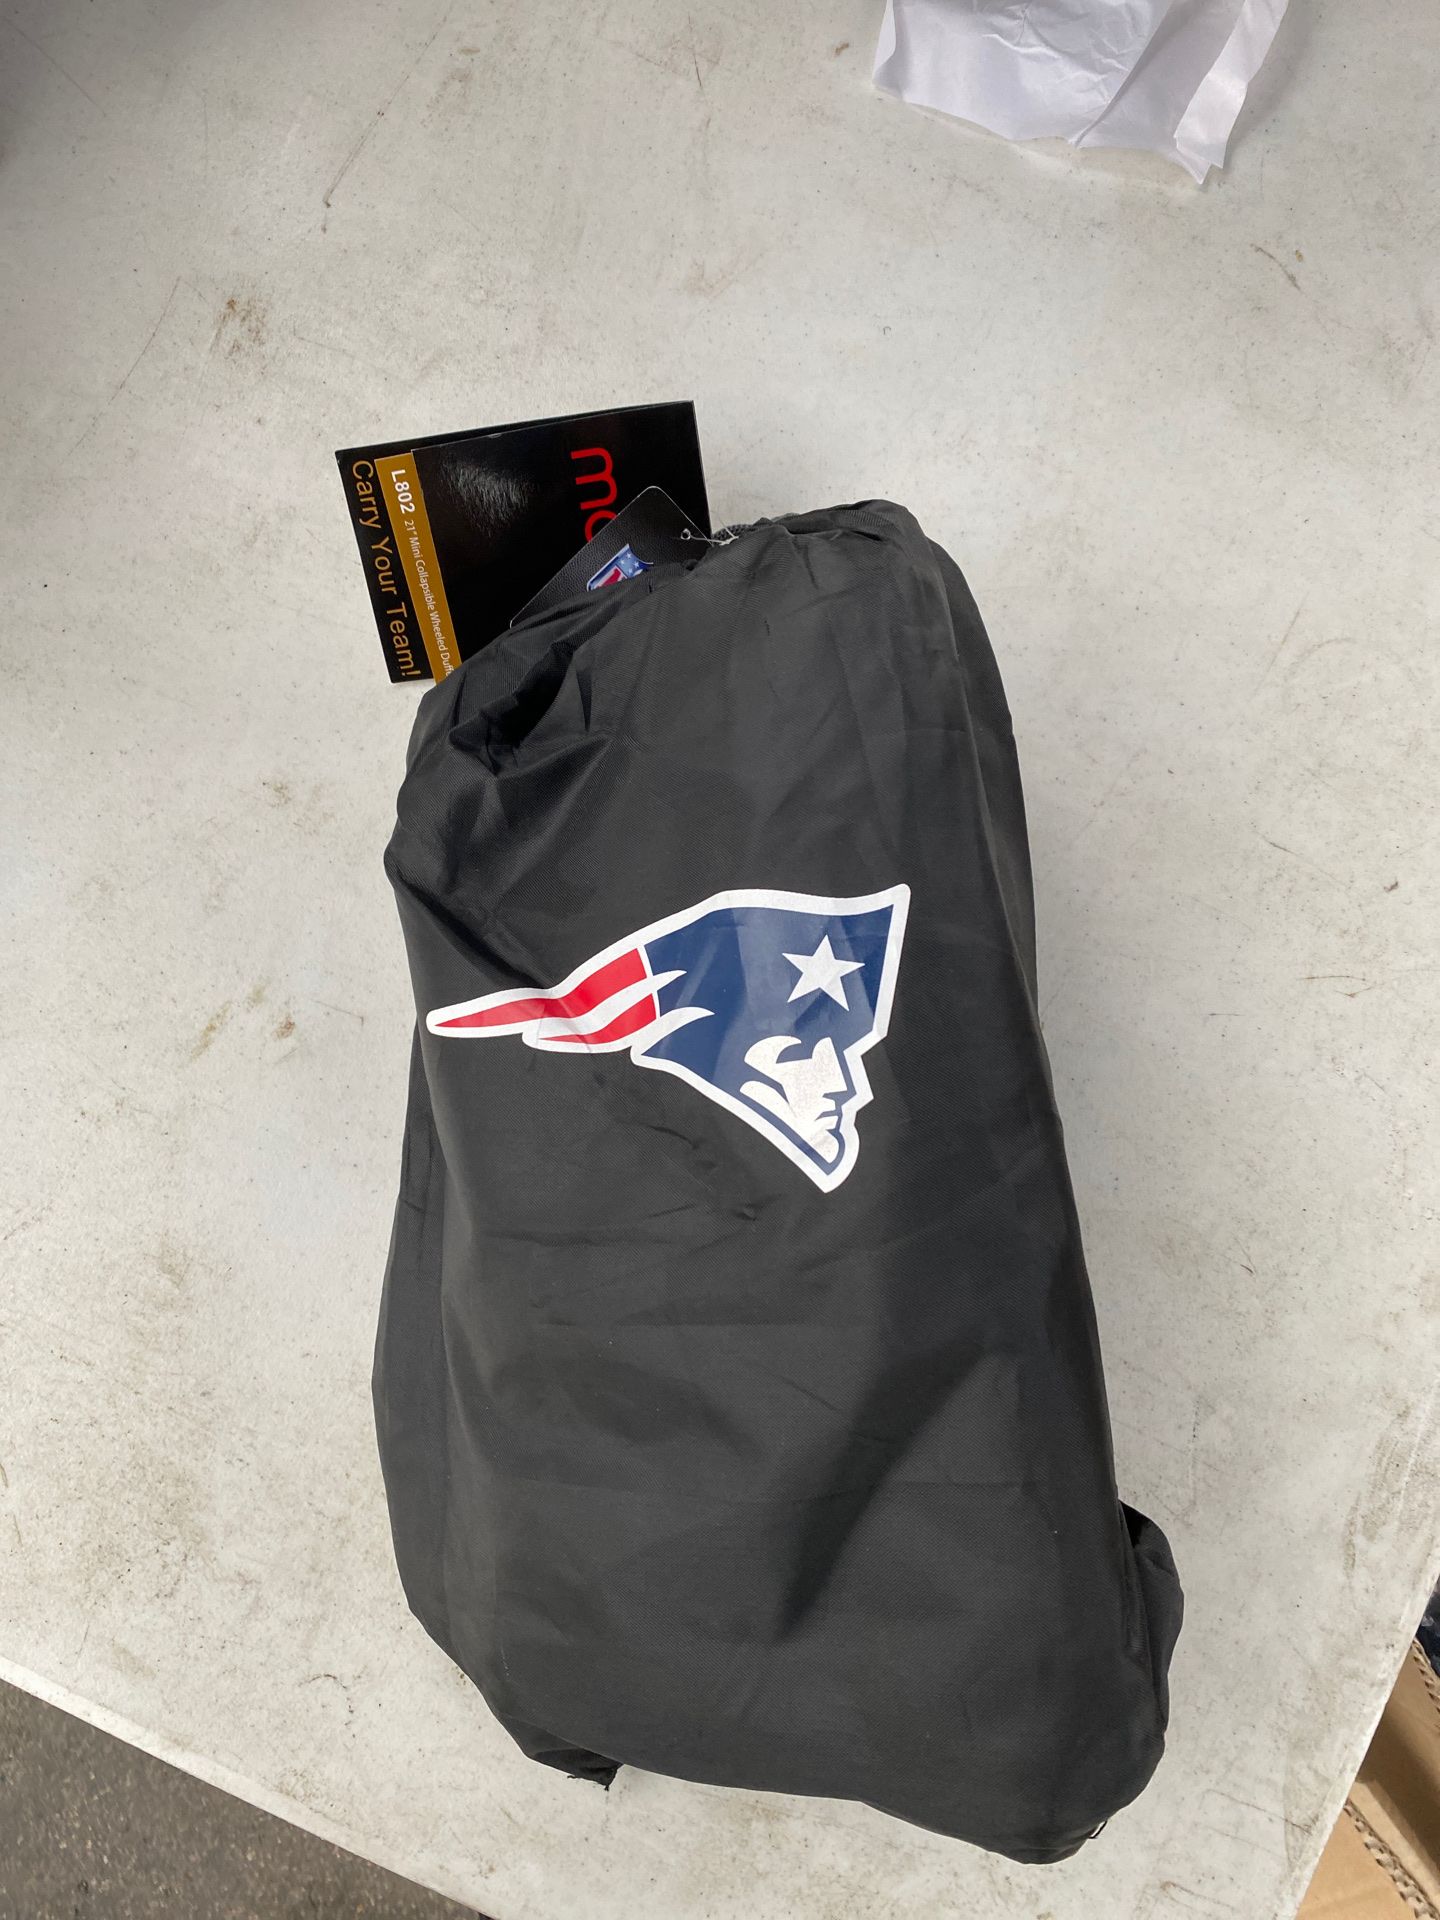 Brand new New England Patriots duffle bag and draw string backpack in one.